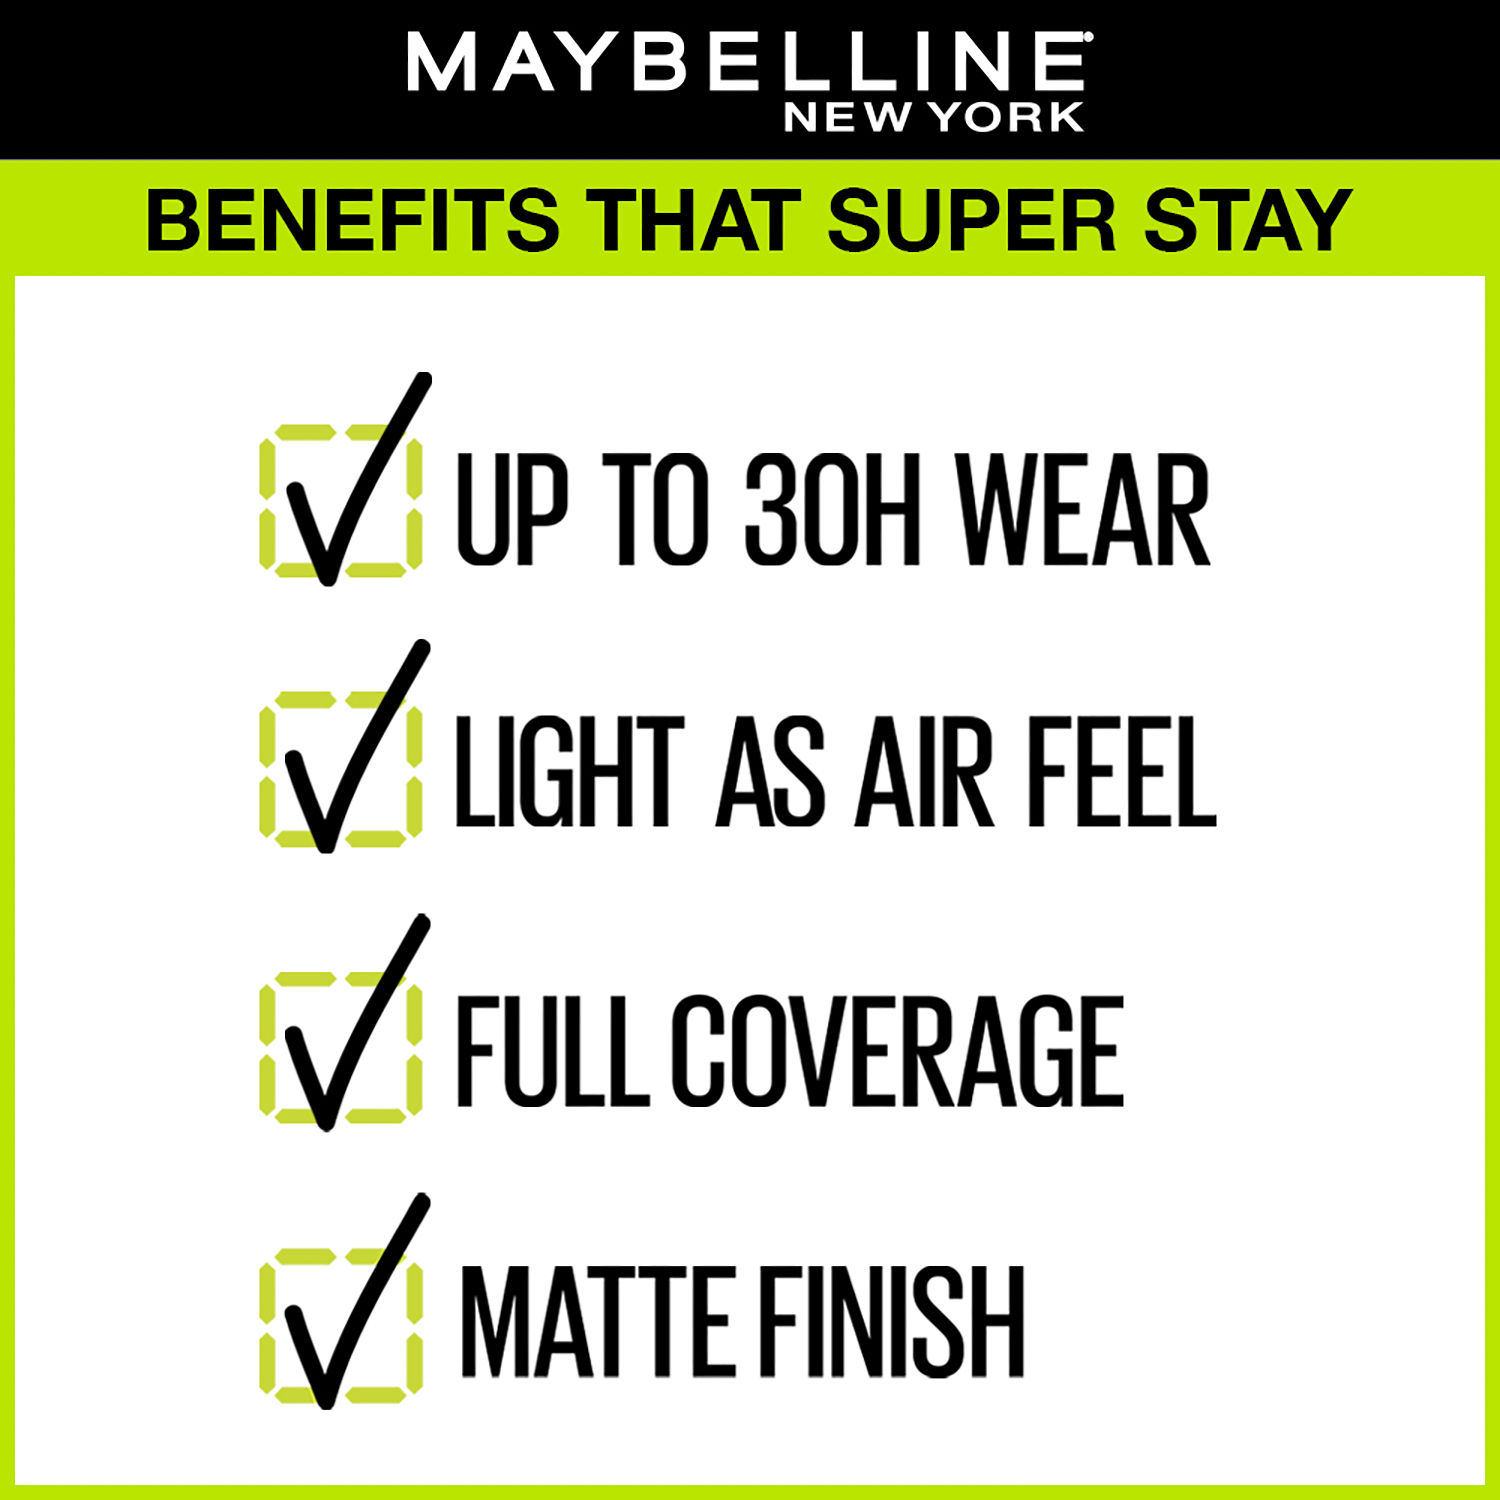 Maybelline New , Wear, 30ml with Coverage Full Transfer Active 112, Ivory, Natural Proof, Liquid Stay Matte HR Super York 30 Wear Finish Foundation